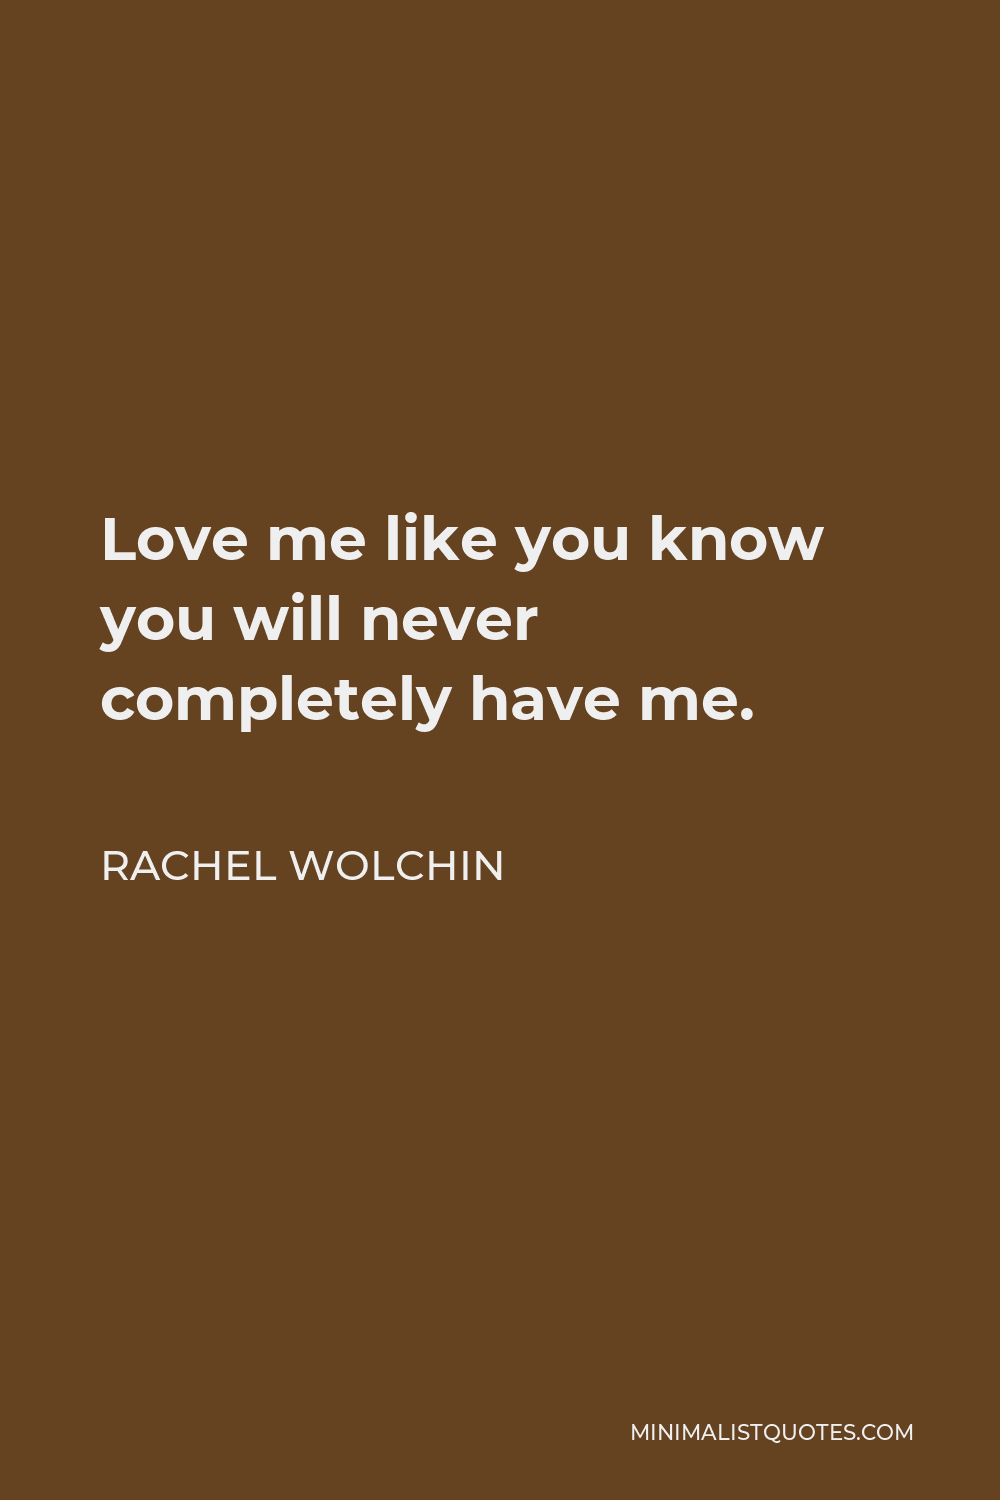 Rachel Wolchin Quote - Love me like you know you will never completely have me.